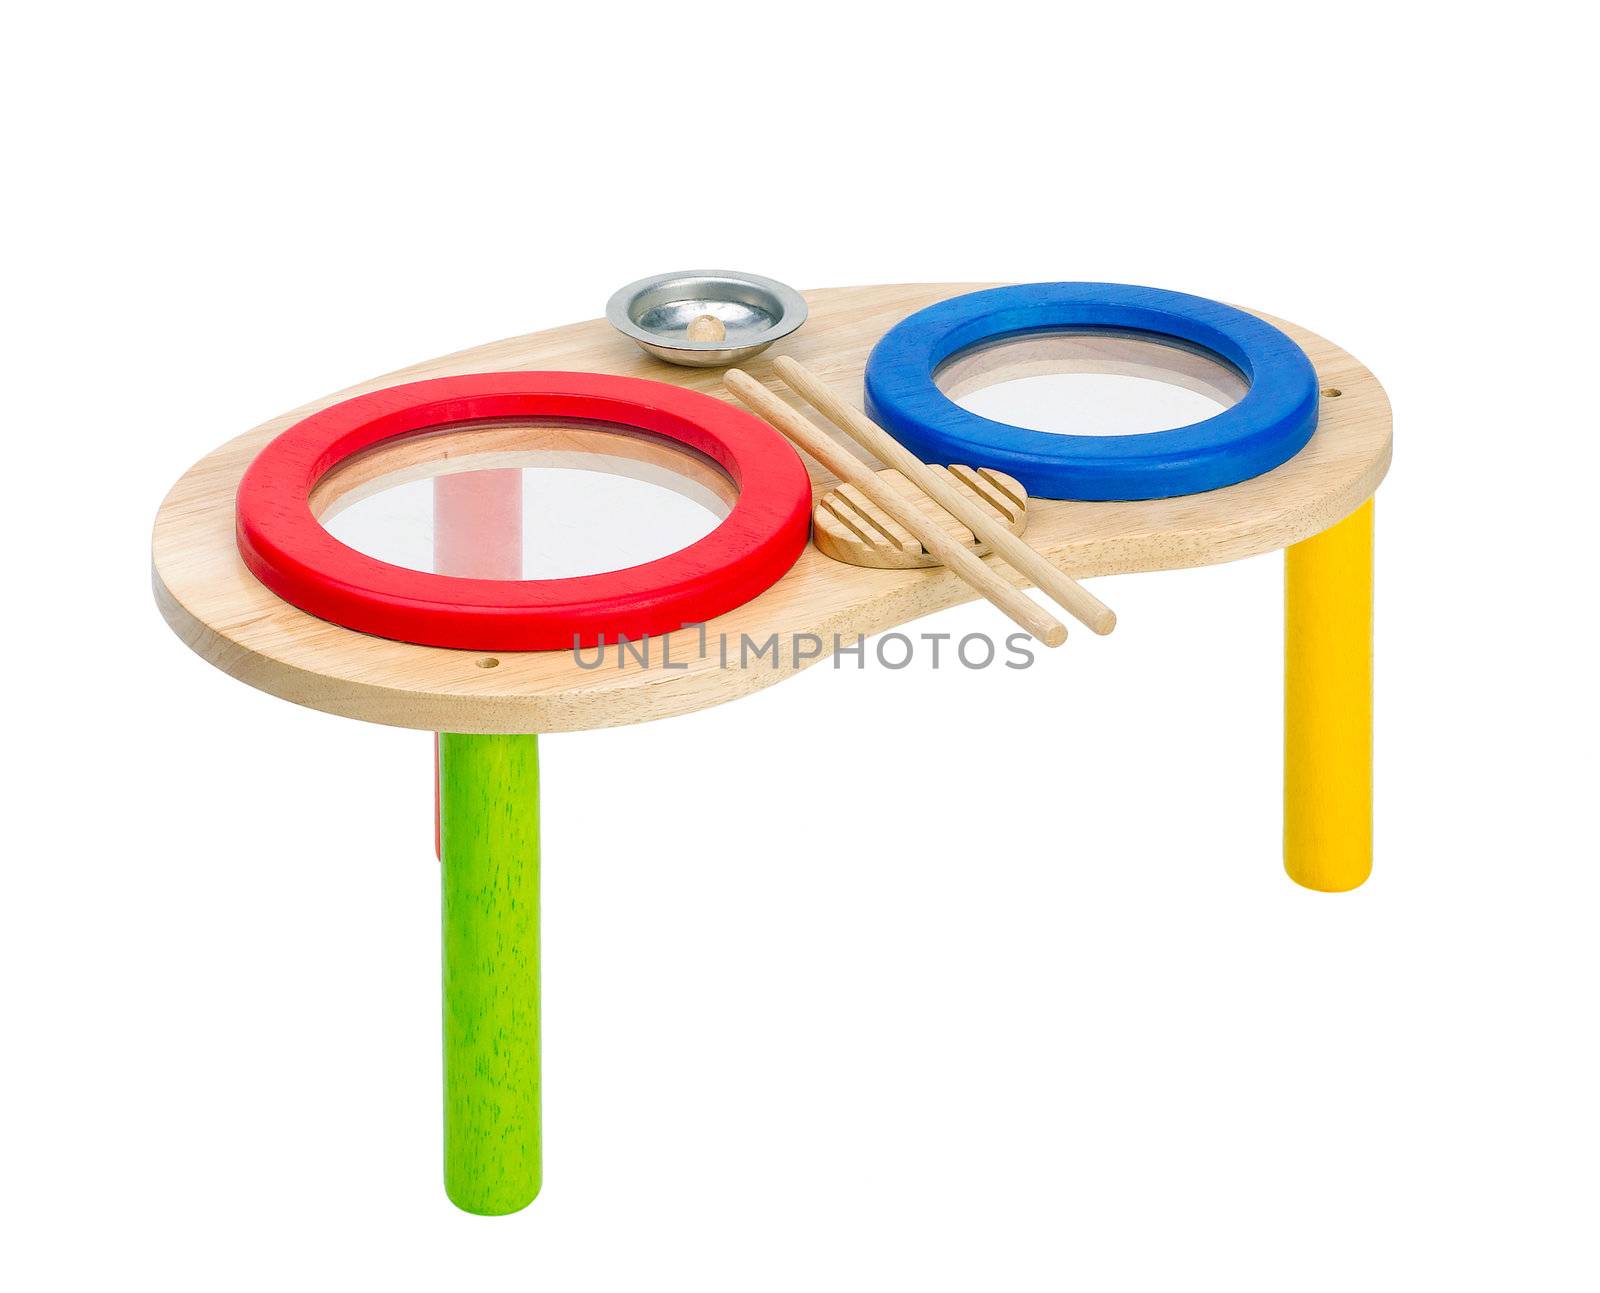 Colorful wooden toy drums for children